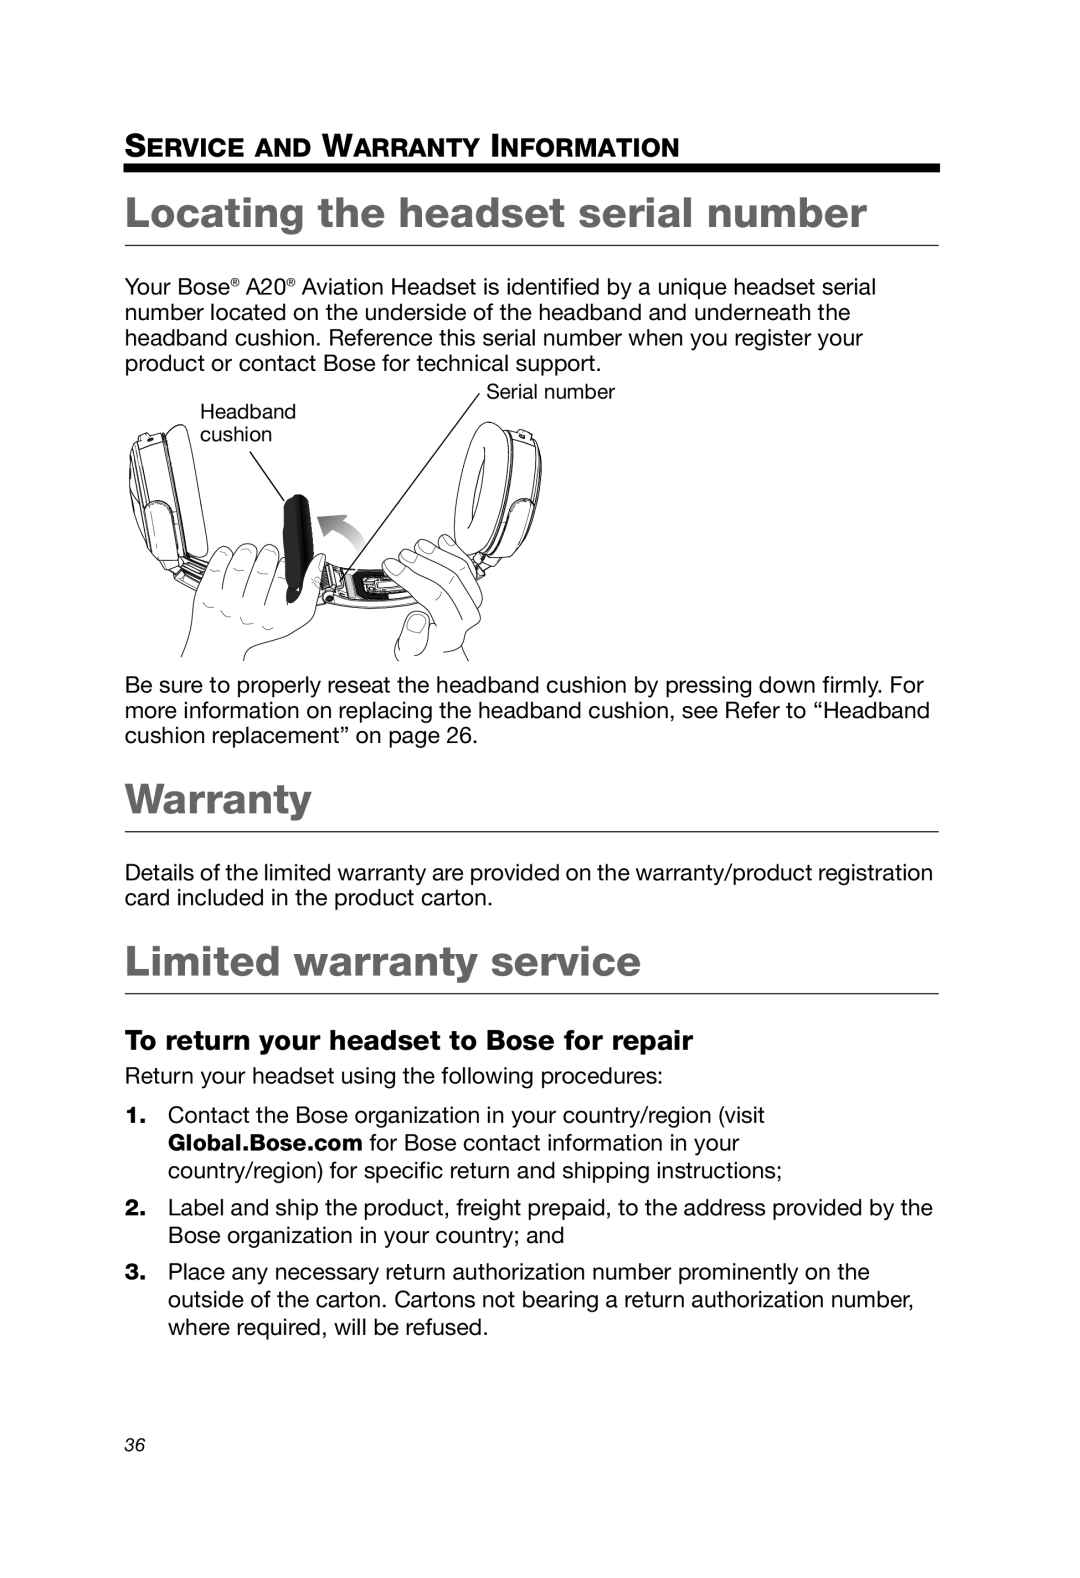 Bose A20 Locating the headset serial number, Warranty, Limited warranty service, To return your headset to Bose for repair 